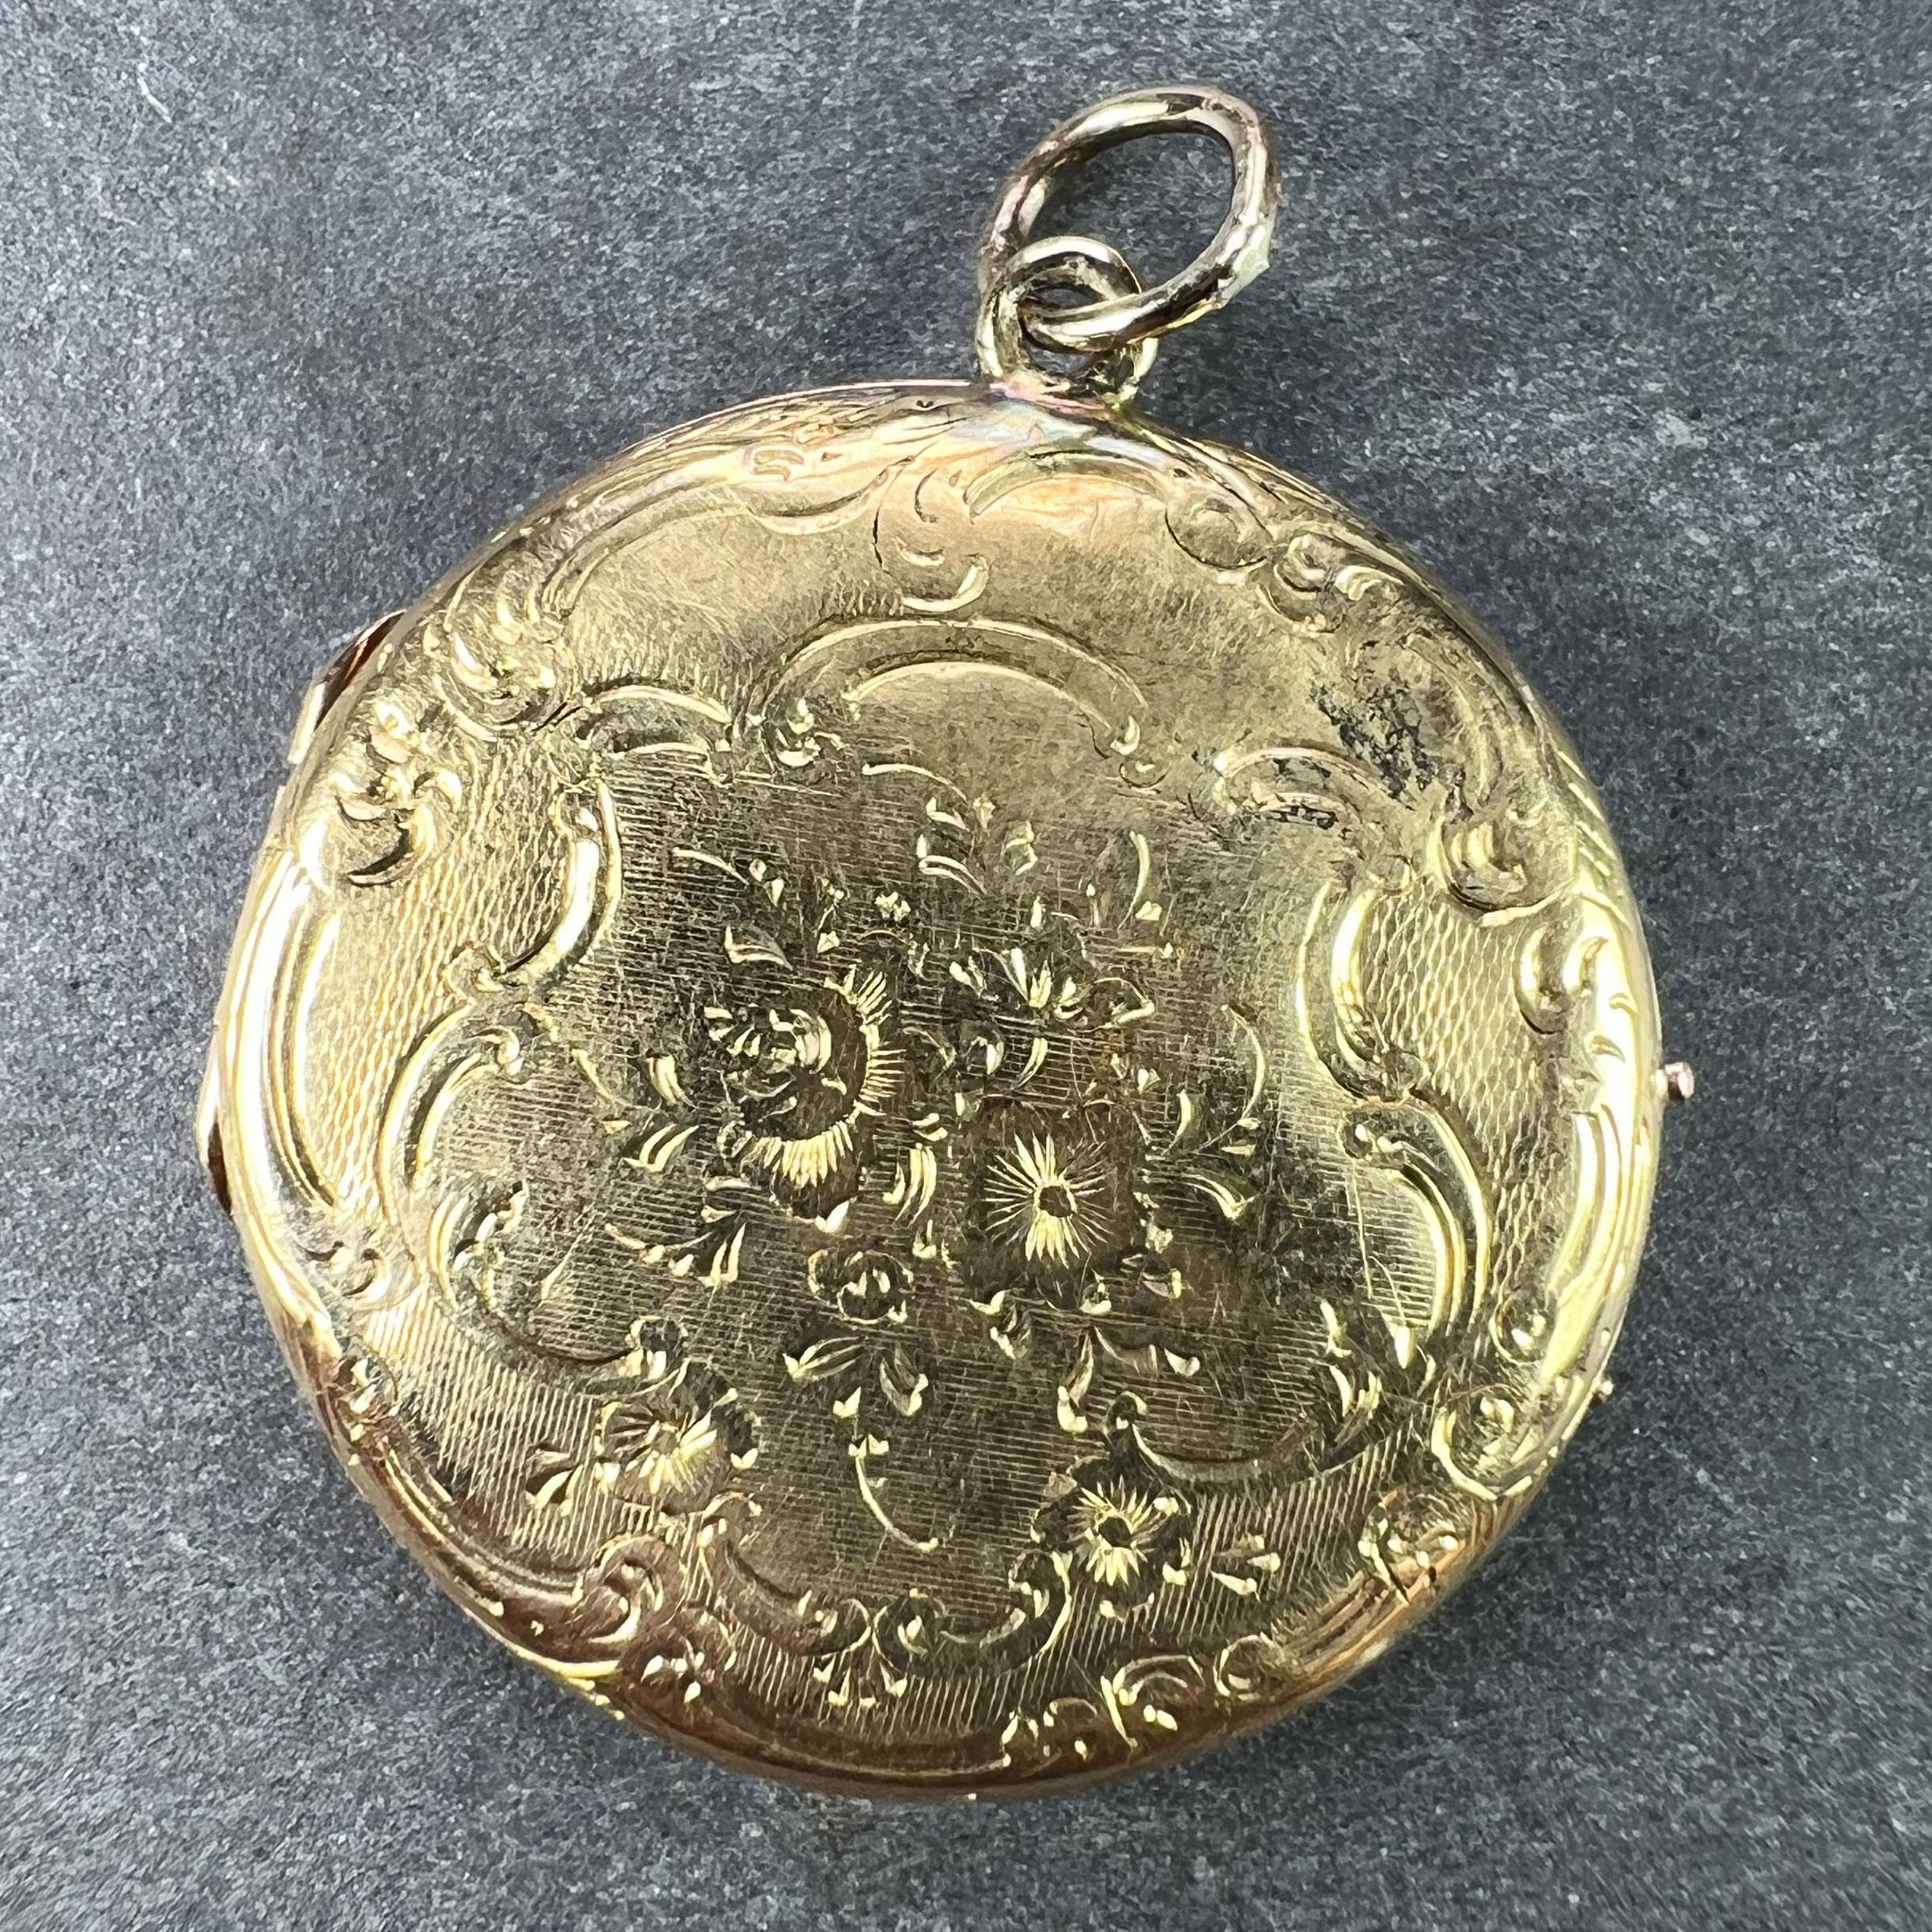 A French 18 karat (18K) yellow gold pendant locket with an engraved spray of flowers to the centre of each side with an engraved scrolling surround. Stamped with the eagle mark for 18 karat gold and French manufacture.
Some dents but otherwise good